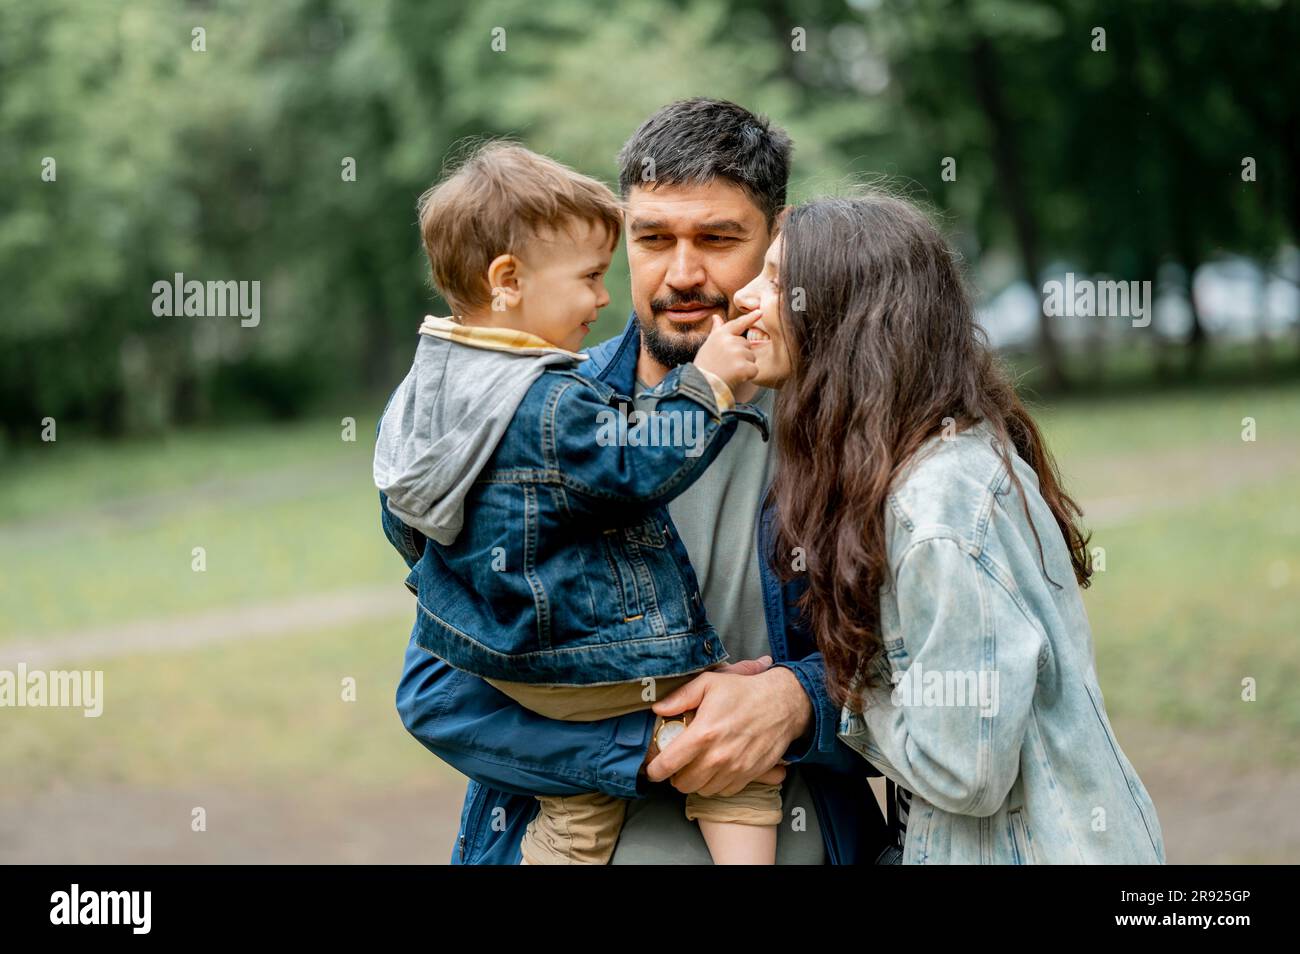 Happy boy touching face of mother in public park Stock Photo